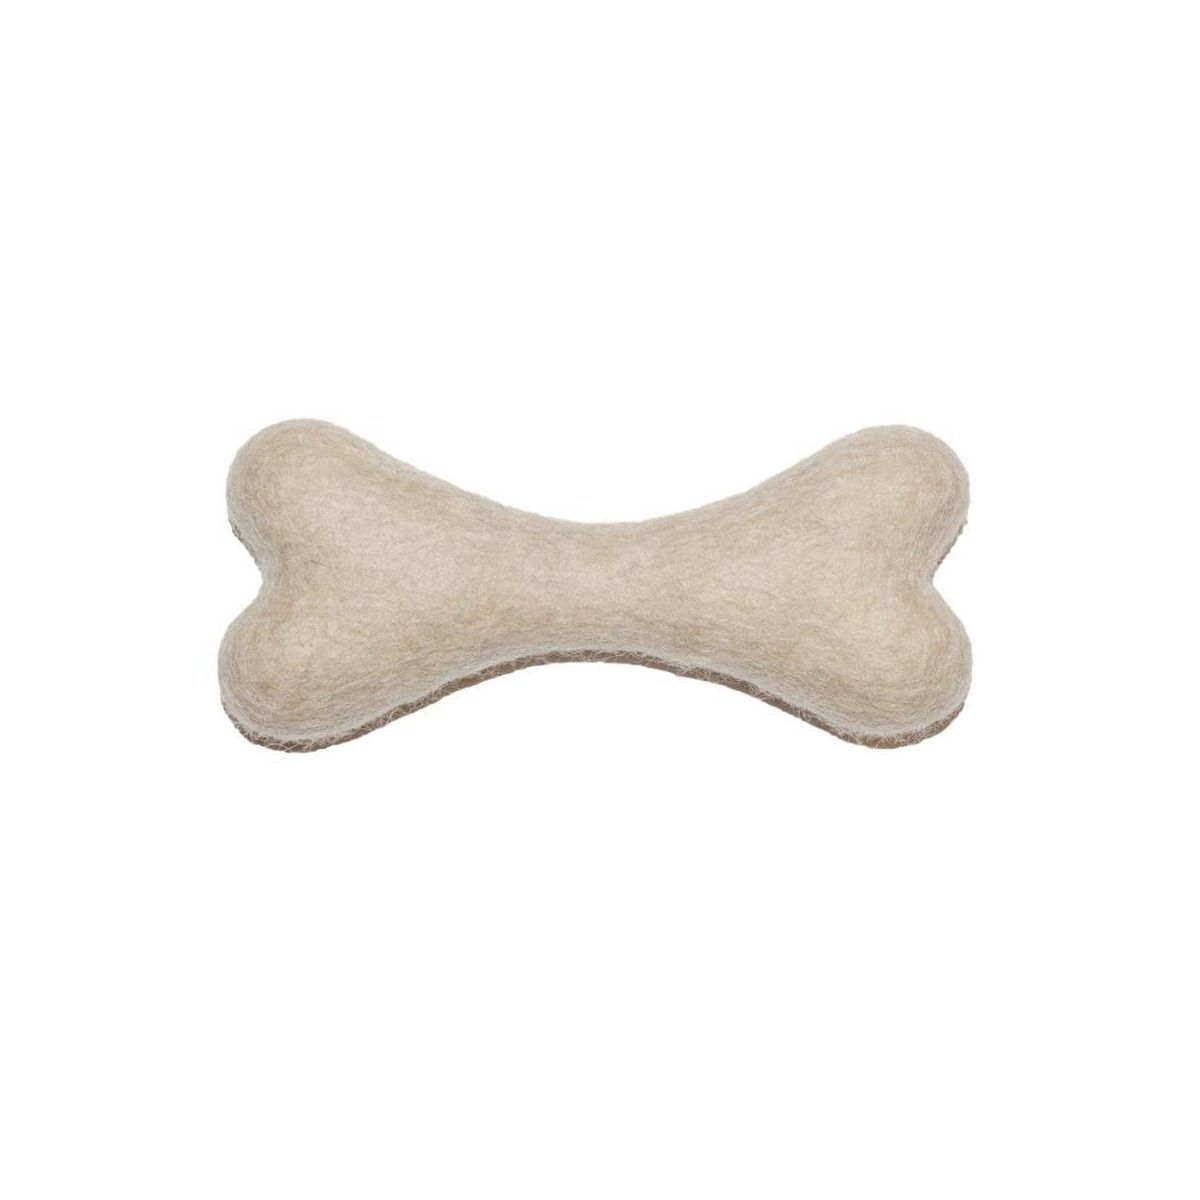 AWOO Bones About It Dog Toy | Target